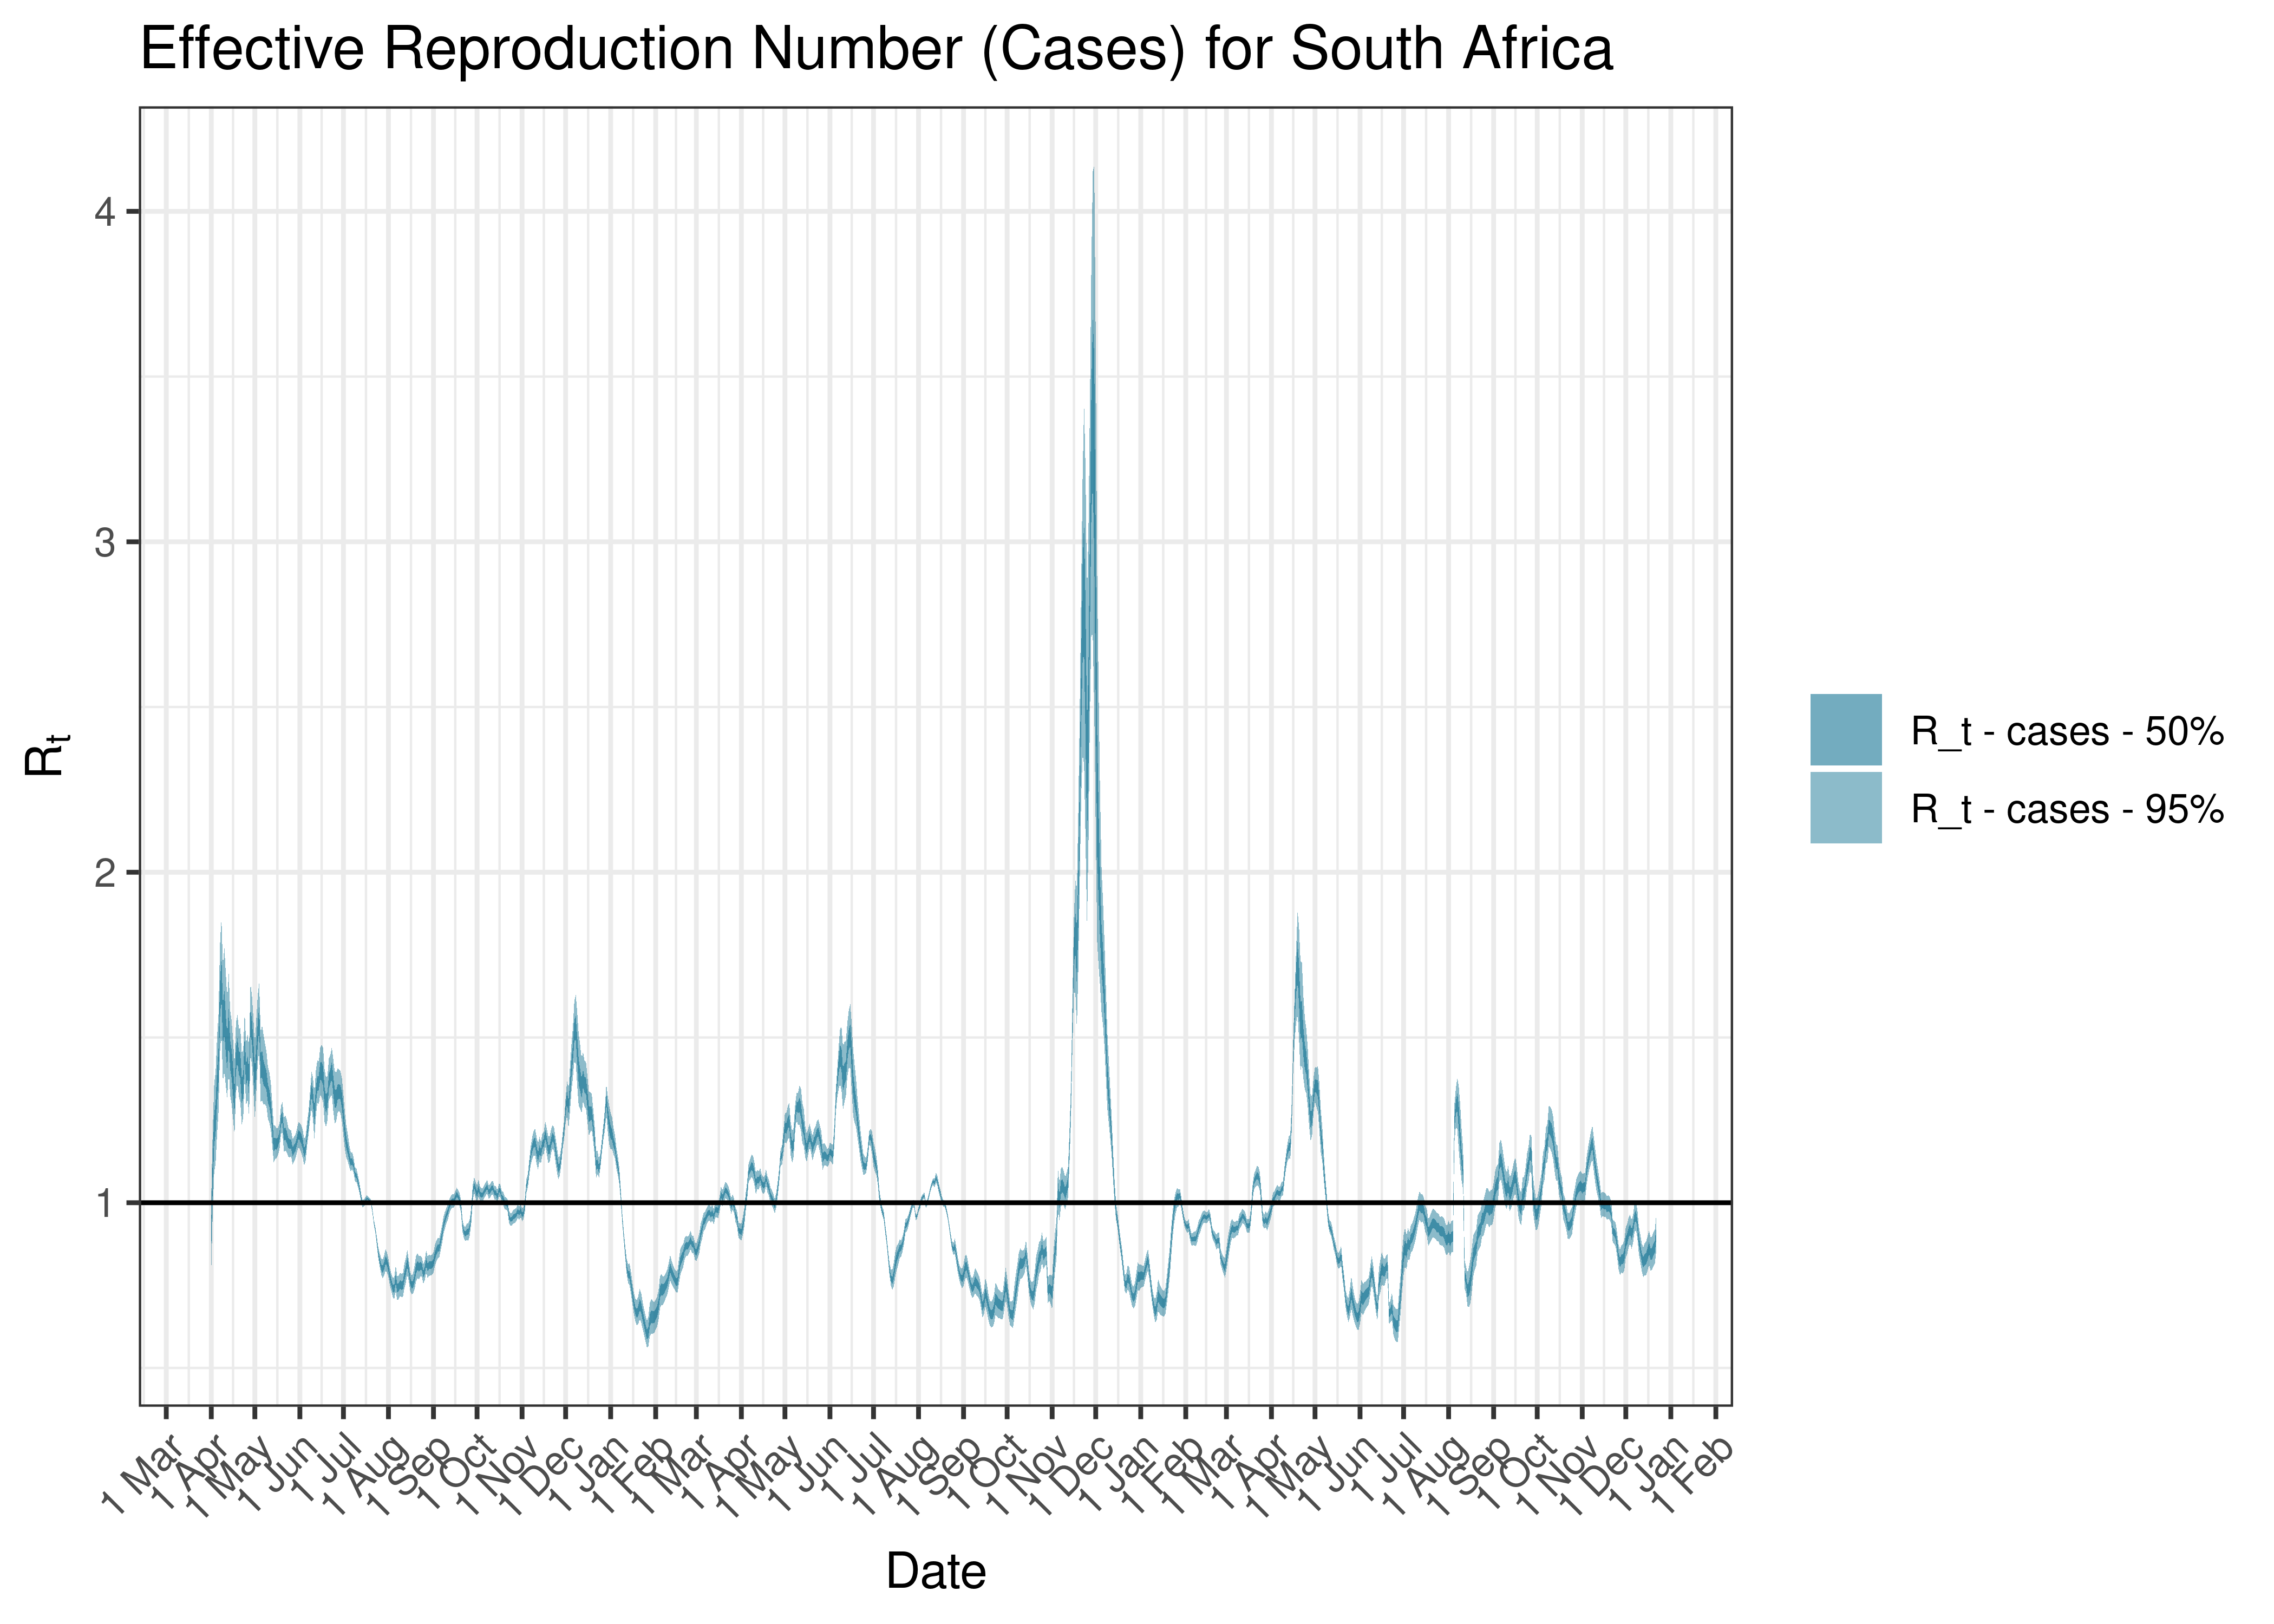 Estimated Effective Reproduction Number Based on Cases for South Africa since 1 April 2020